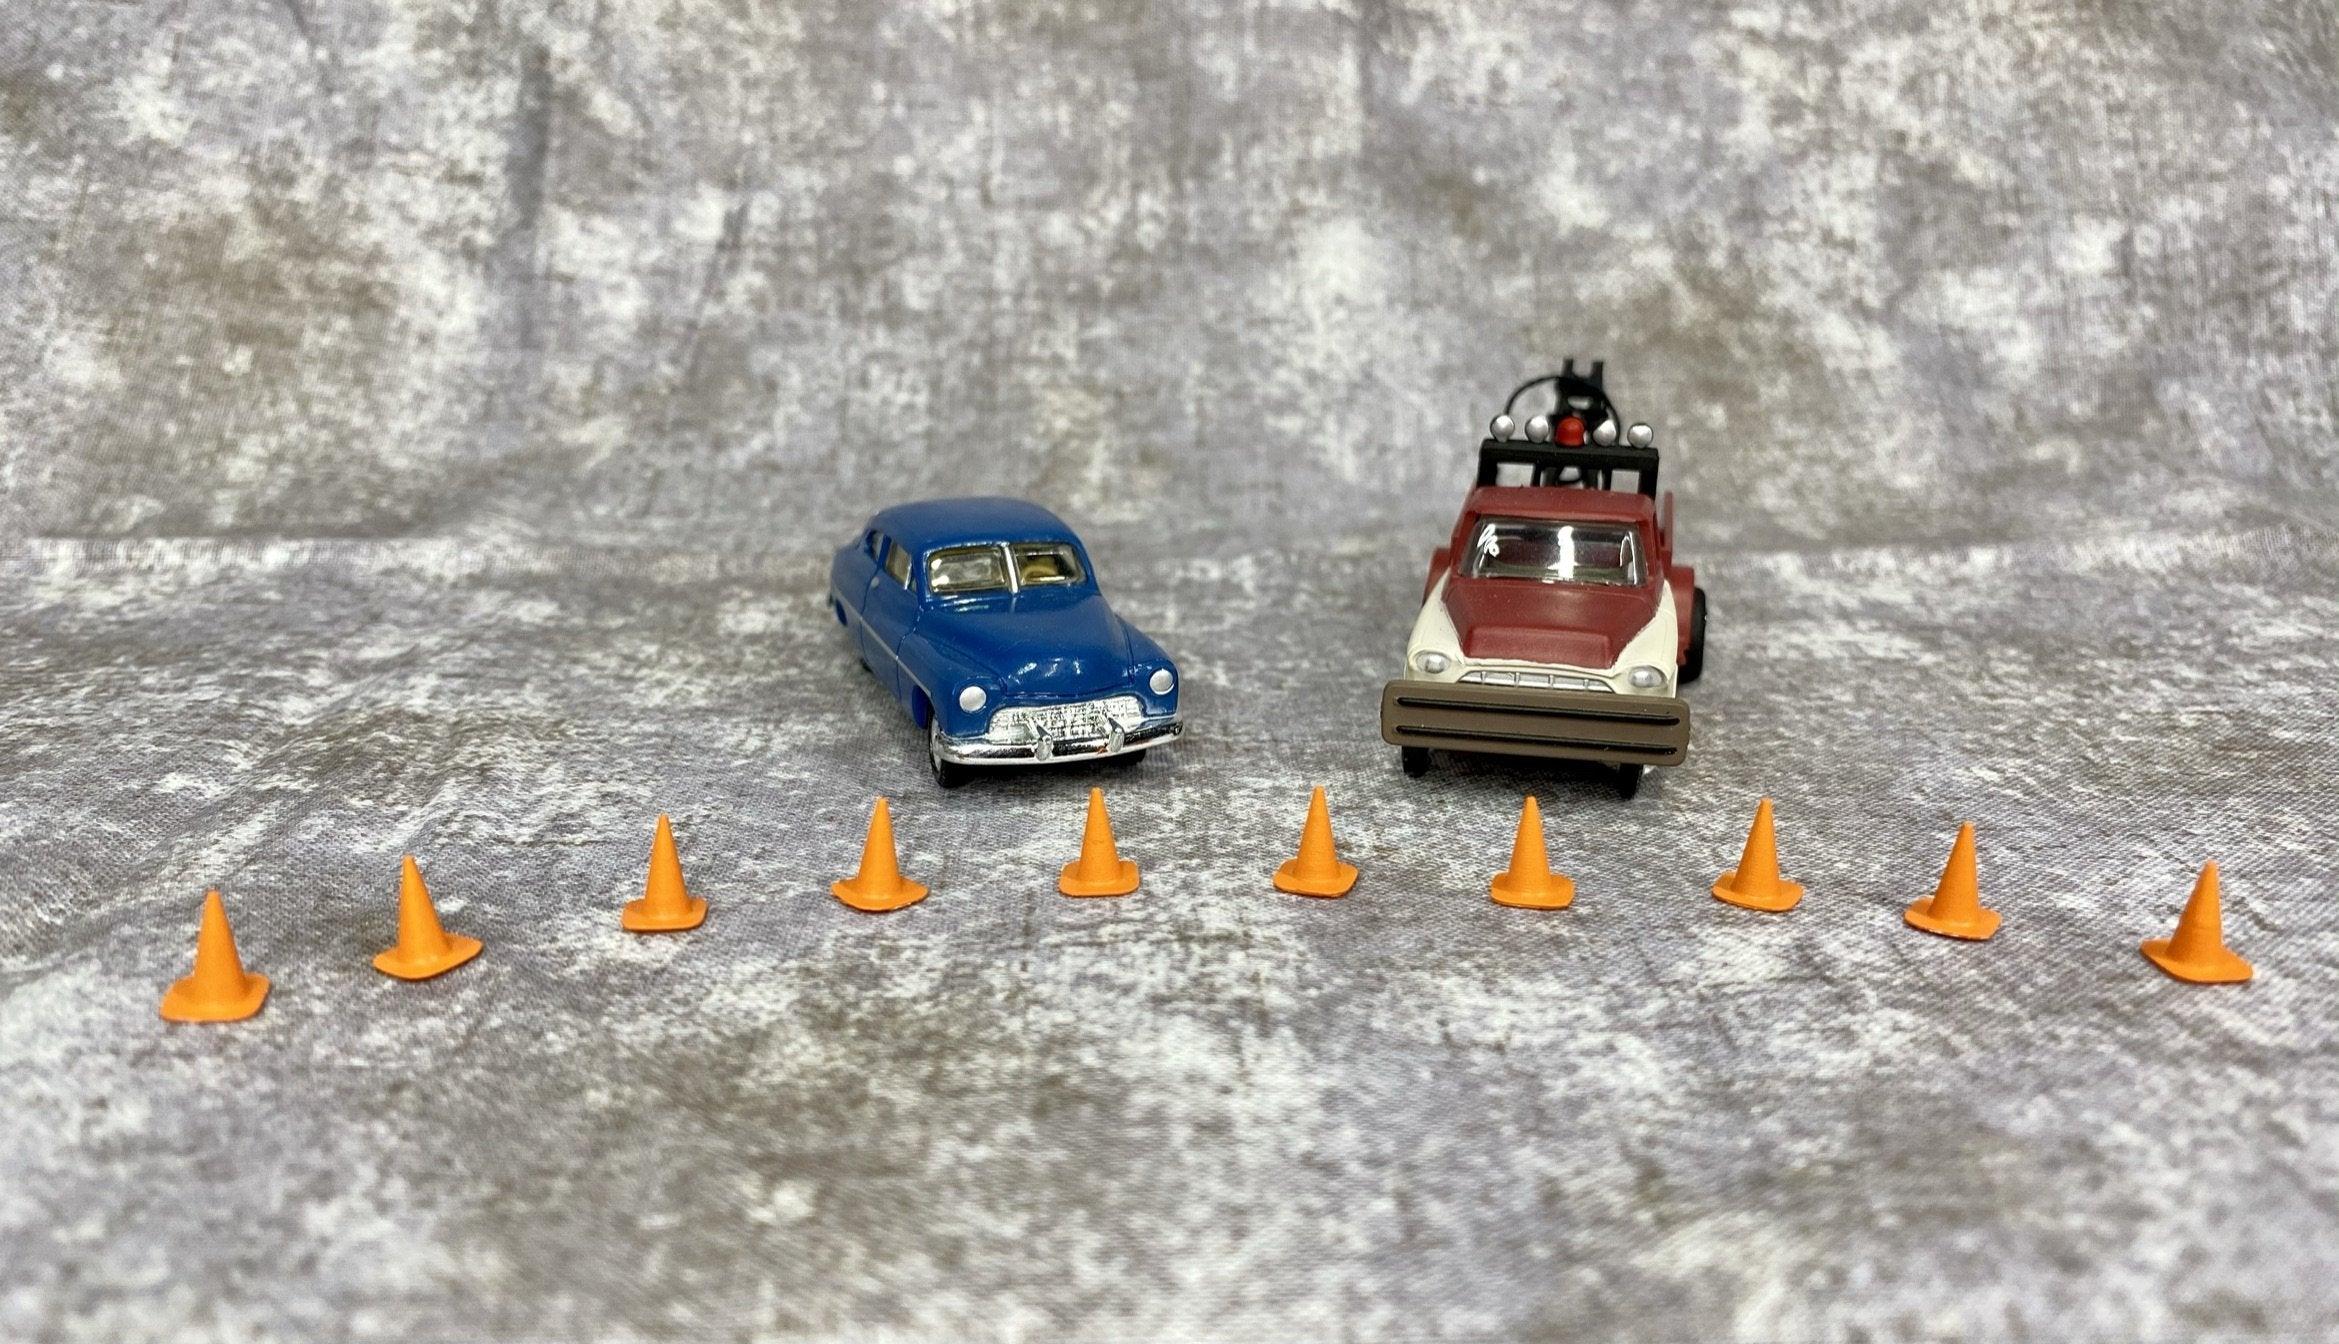 Squeaky's Trains | 28″ Traffic/Construction Cones - Basic | HO Scale